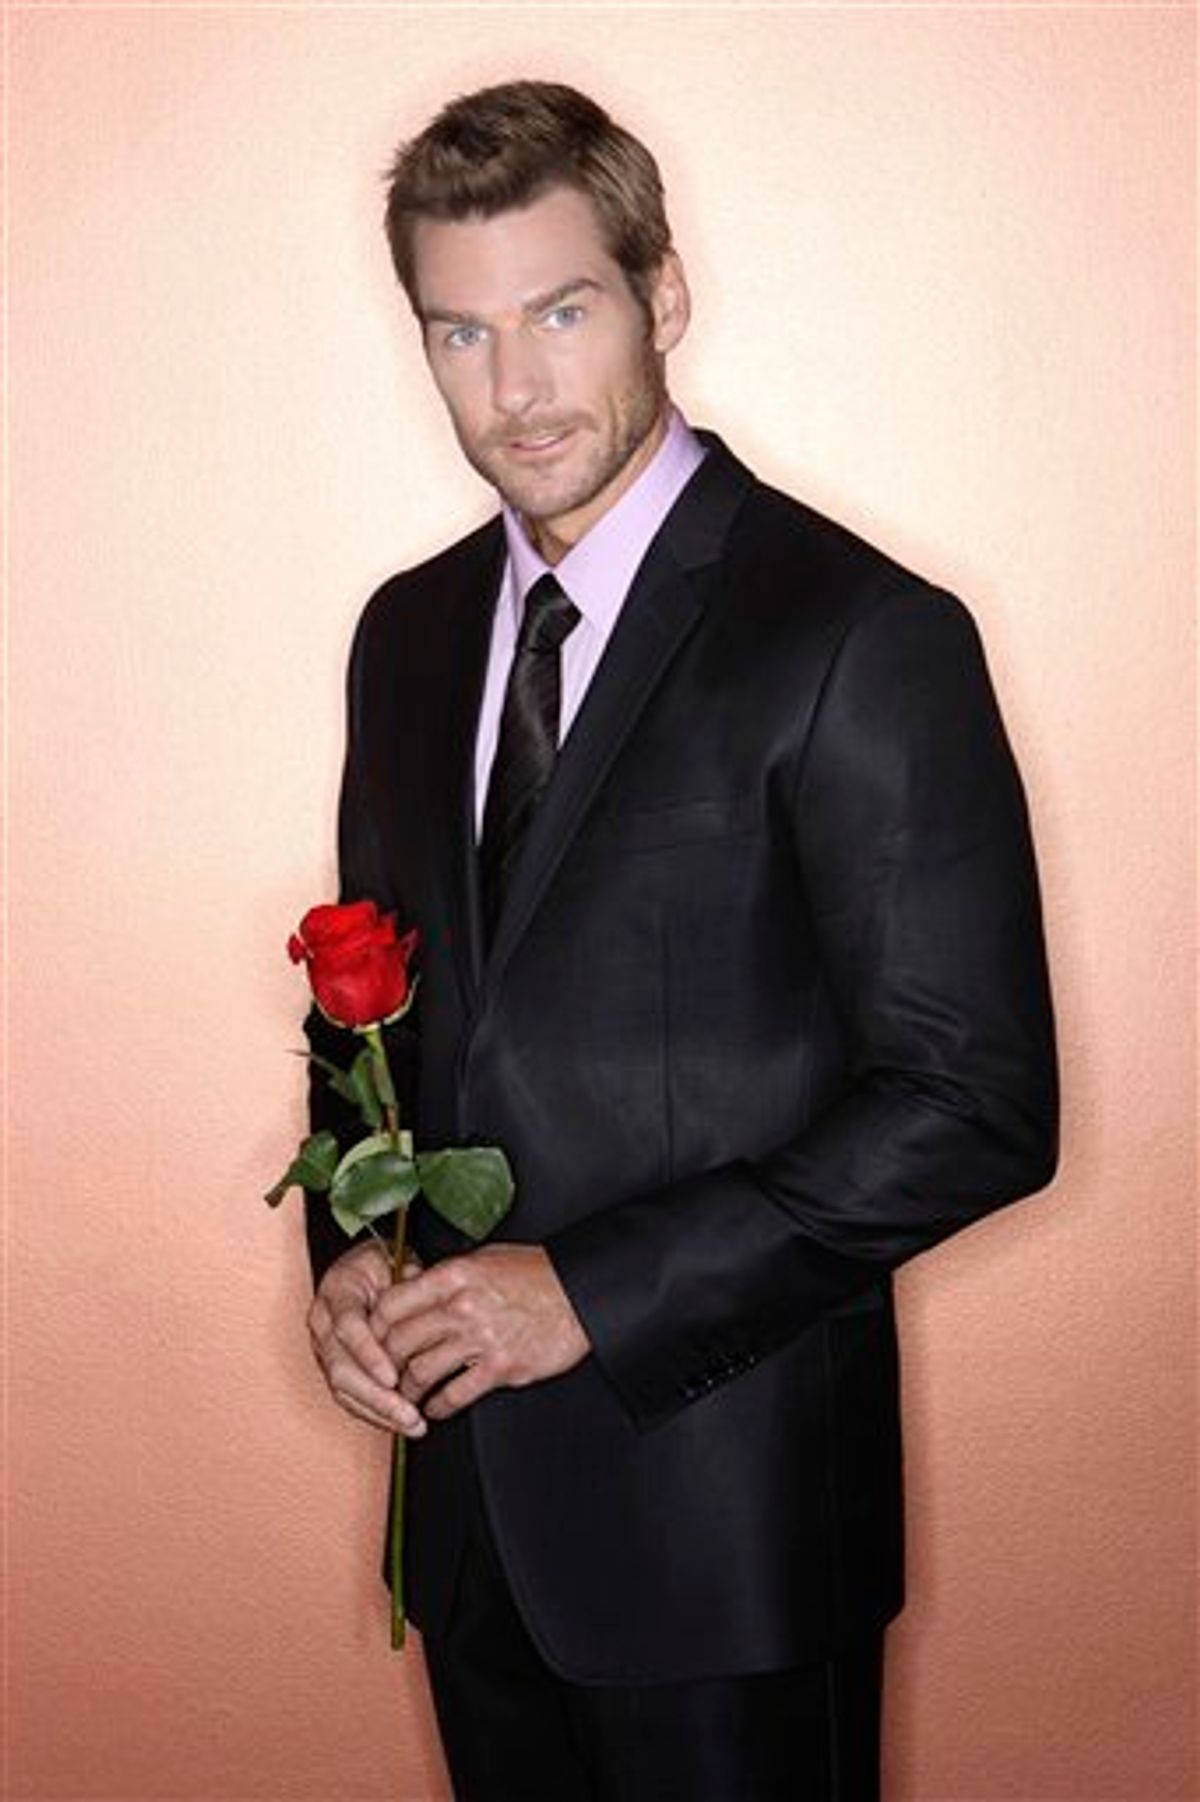 In this undated publicity image released by ABC, Brad Womack from "The Bachelor," is shown. The series premieres Monday, Jan. 3, 2011 at 8:00 p.m. EST on ABC. (AP Photo/ABC, Bob D'Amico) (AP)